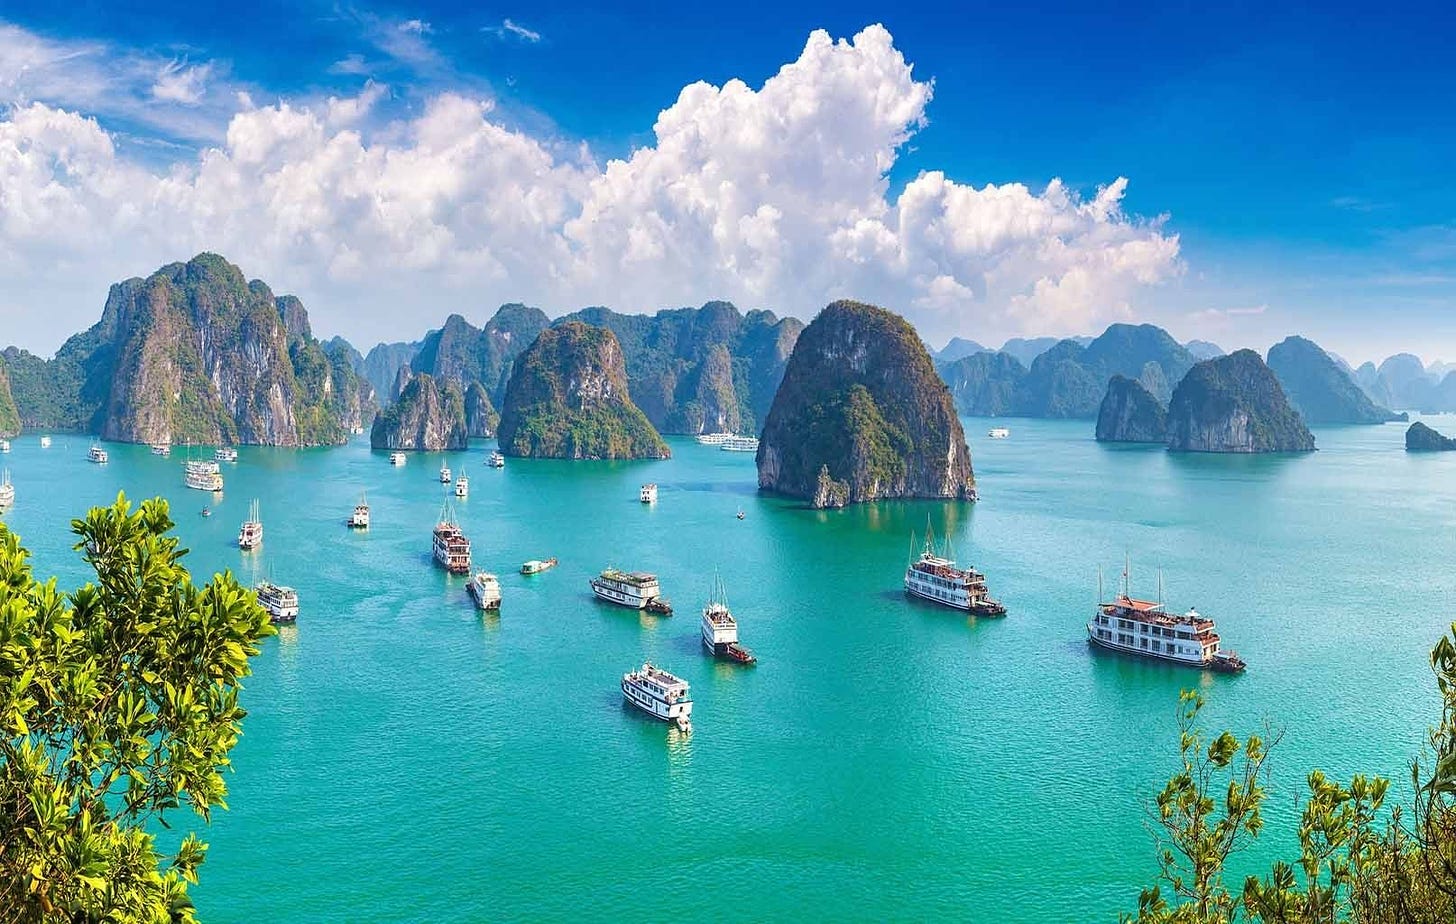 Hanoi to Halong Bay: An ultimate guide for your journey